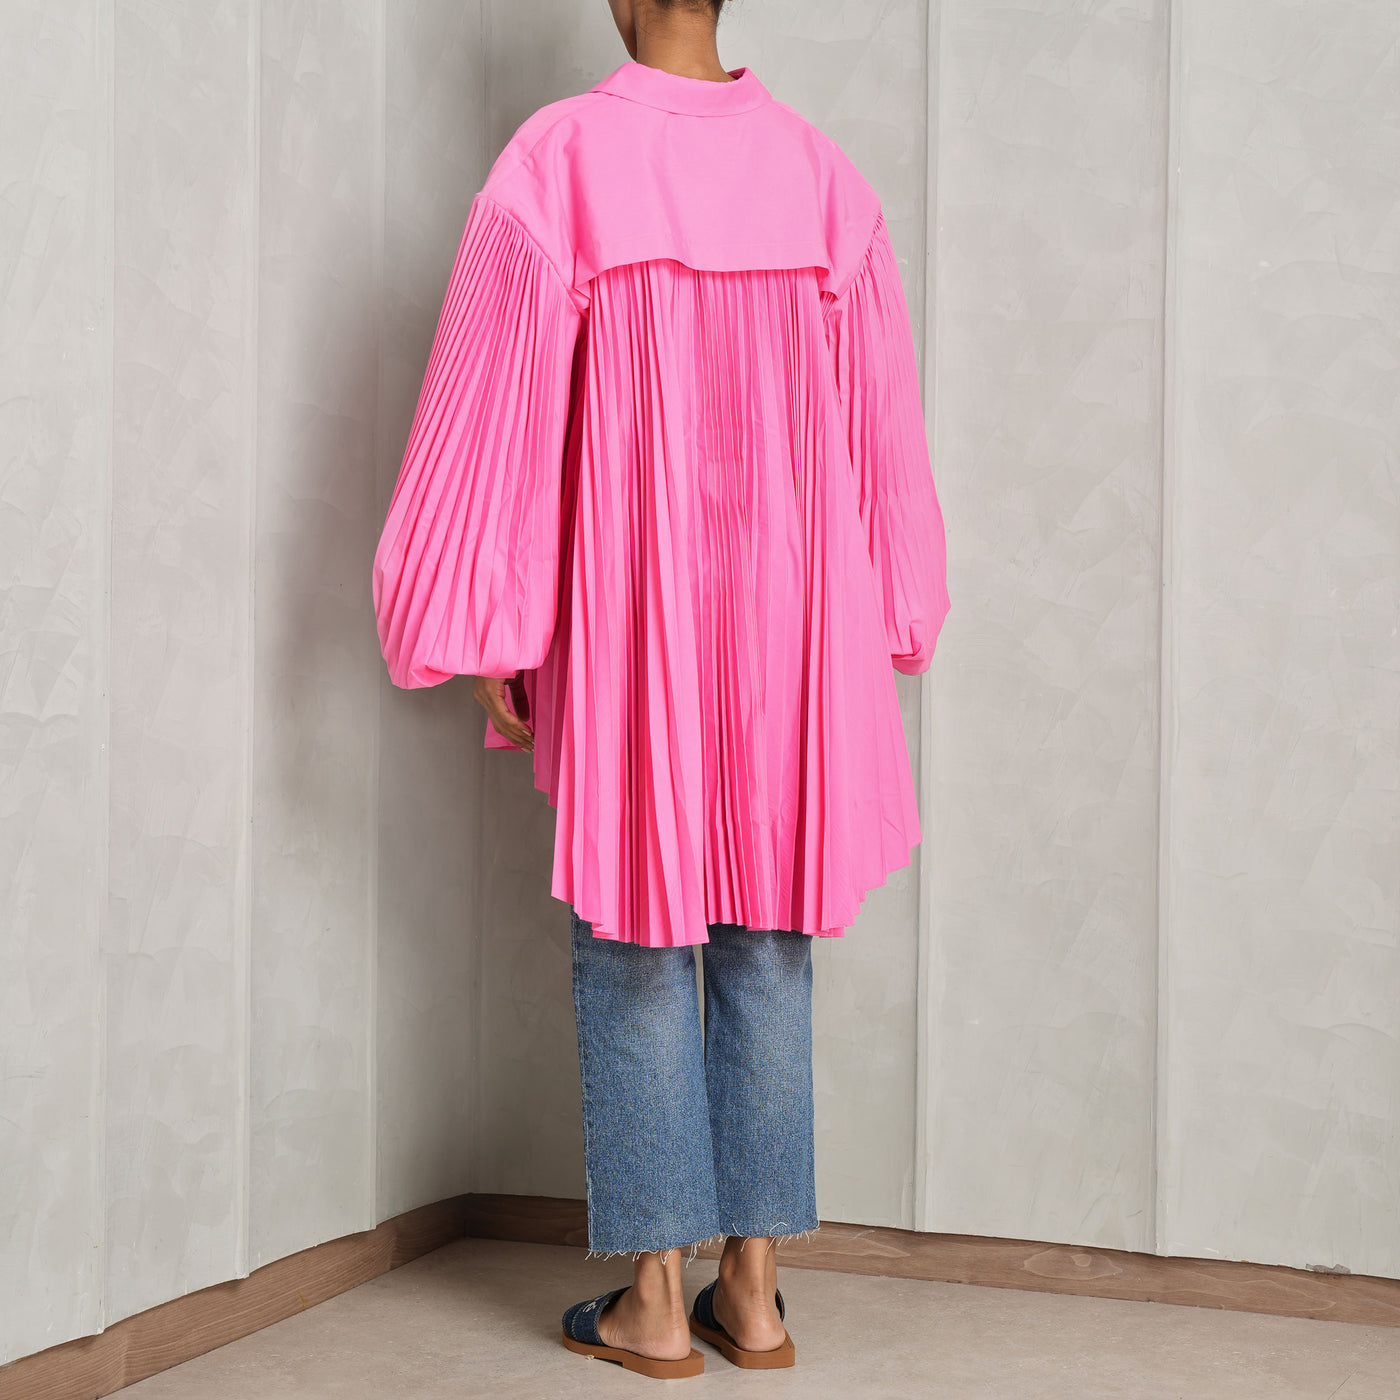 ACLER pleated kirtling pink shirt